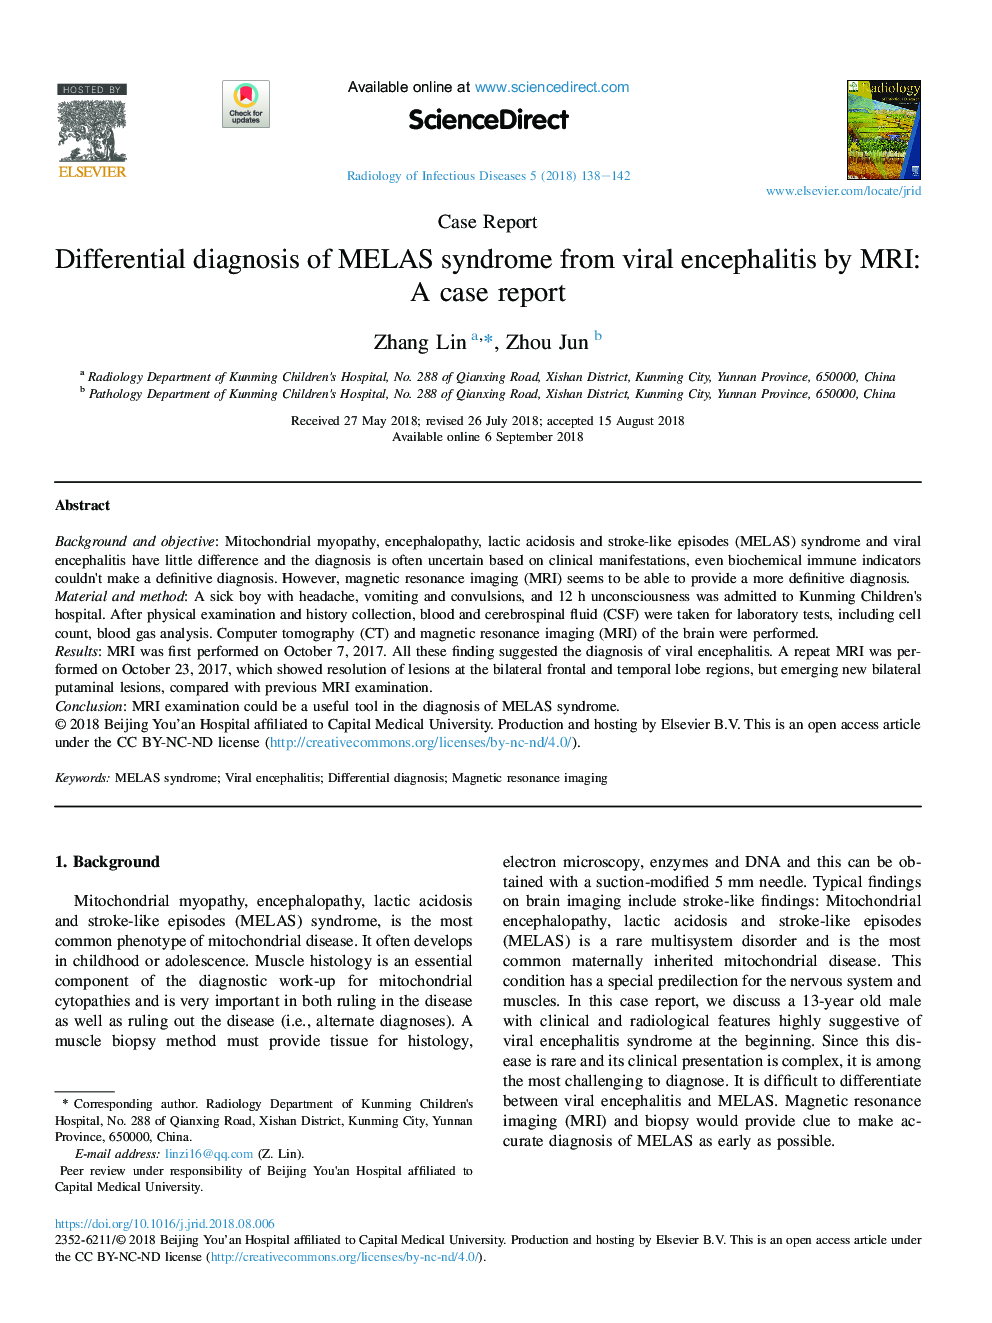 Differential diagnosis of MELAS syndrome from viral encephalitis by MRI: A case report